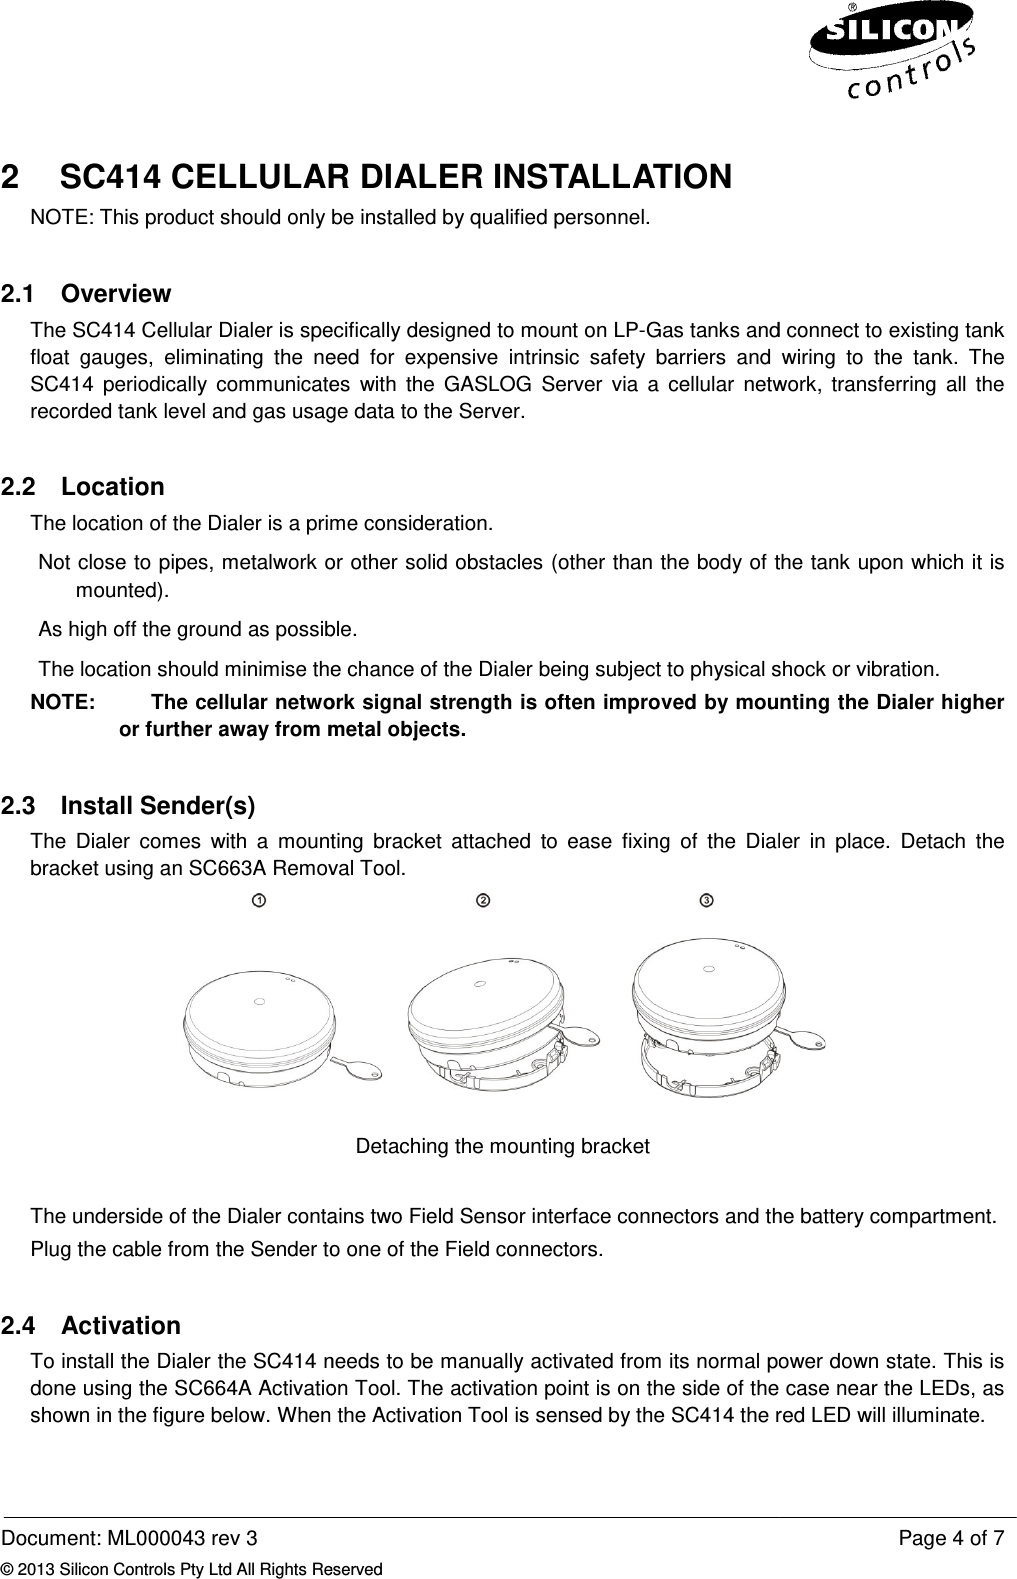  Document: ML000043 rev 3 © 2013 Silicon Controls Pty Ltd All Rights Reserved2 SC414 CELLULAR DIALER INSTALLATIONNOTE: This product should only be installed by qualified personnel.2.1  Overview The SC414 Cellular Dialer is specifically designed float  gauges,  eliminating  the  need  for  expensive  intrinsic  safety  barriers  and  wiring  to  the  tank.SC414  periodically  communicates  with  the  GASLOG  Server  via  a  cellular  network,  transferring  all  therecorded tank level and gas usage data to the Server.2.2  Location The location of the Dialer is a prime consideration. Not close to pipes, metalwork or other solid obstacles (other than the body of the tank upon which it is mounted). As high off the ground as possible.The location should minimise the chance of the Dialer being subject to physical shock or vibration.NOTE:    The cellular network signal strength is often improved by mounting the Dialer higher or further away from metal objects.2.3  Install Sender(s) The  Dialer  comes  with  a  mounting  bracket  attached  to  ease bracket using an SC663A Removal Tool.The underside of the Dialer contains two Field Sensor interface connectors andPlug the cable from the Sender to one of the Field connectors.2.4  Activation To install the Dialer the SC414 needs to be manually activated from its normal power down state.done using the SC664A Activation Tool.shown in the figure below. When  Reserved SC414 CELLULAR DIALER INSTALLATION NOTE: This product should only be installed by qualified personnel. The SC414 Cellular Dialer is specifically designed to mount on LP-Gas tanks and connect to existing tank float  gauges,  eliminating  the  need  for  expensive  intrinsic  safety  barriers  and  wiring  to  the  tank.SC414  periodically  communicates  with  the  GASLOG  Server  via  a  cellular  network,  transferring  all  therecorded tank level and gas usage data to the Server. The location of the Dialer is a prime consideration.  Not close to pipes, metalwork or other solid obstacles (other than the body of the tank upon which it is as possible. The location should minimise the chance of the Dialer being subject to physical shock or vibration.The cellular network signal strength is often improved by mounting the Dialer higher or further away from metal objects. The  Dialer  comes  with  a  mounting  bracket  attached  to  ease fixing  of  the  Dialer  in  placebracket using an SC663A Removal Tool.  Detaching the mounting bracket  The underside of the Dialer contains two Field Sensor interface connectors and the battery compartment. ender to one of the Field connectors. the SC414 needs to be manually activated from its normal power down state.done using the SC664A Activation Tool. The activation point is on the side of the case near the LEDs, as When the Activation Tool is sensed by the SC414 the red LED will illuminate.Page 4 of 7 Gas tanks and connect to existing tank float  gauges,  eliminating  the  need  for  expensive  intrinsic  safety  barriers  and  wiring  to  the  tank.  The SC414  periodically  communicates  with  the  GASLOG  Server  via  a  cellular  network,  transferring  all  the Not close to pipes, metalwork or other solid obstacles (other than the body of the tank upon which it is The location should minimise the chance of the Dialer being subject to physical shock or vibration. The cellular network signal strength is often improved by mounting the Dialer higher fixing  of  the  Dialer  in  place.  Detach  the  the battery compartment.  the SC414 needs to be manually activated from its normal power down state. This is activation point is on the side of the case near the LEDs, as Activation Tool is sensed by the SC414 the red LED will illuminate. 